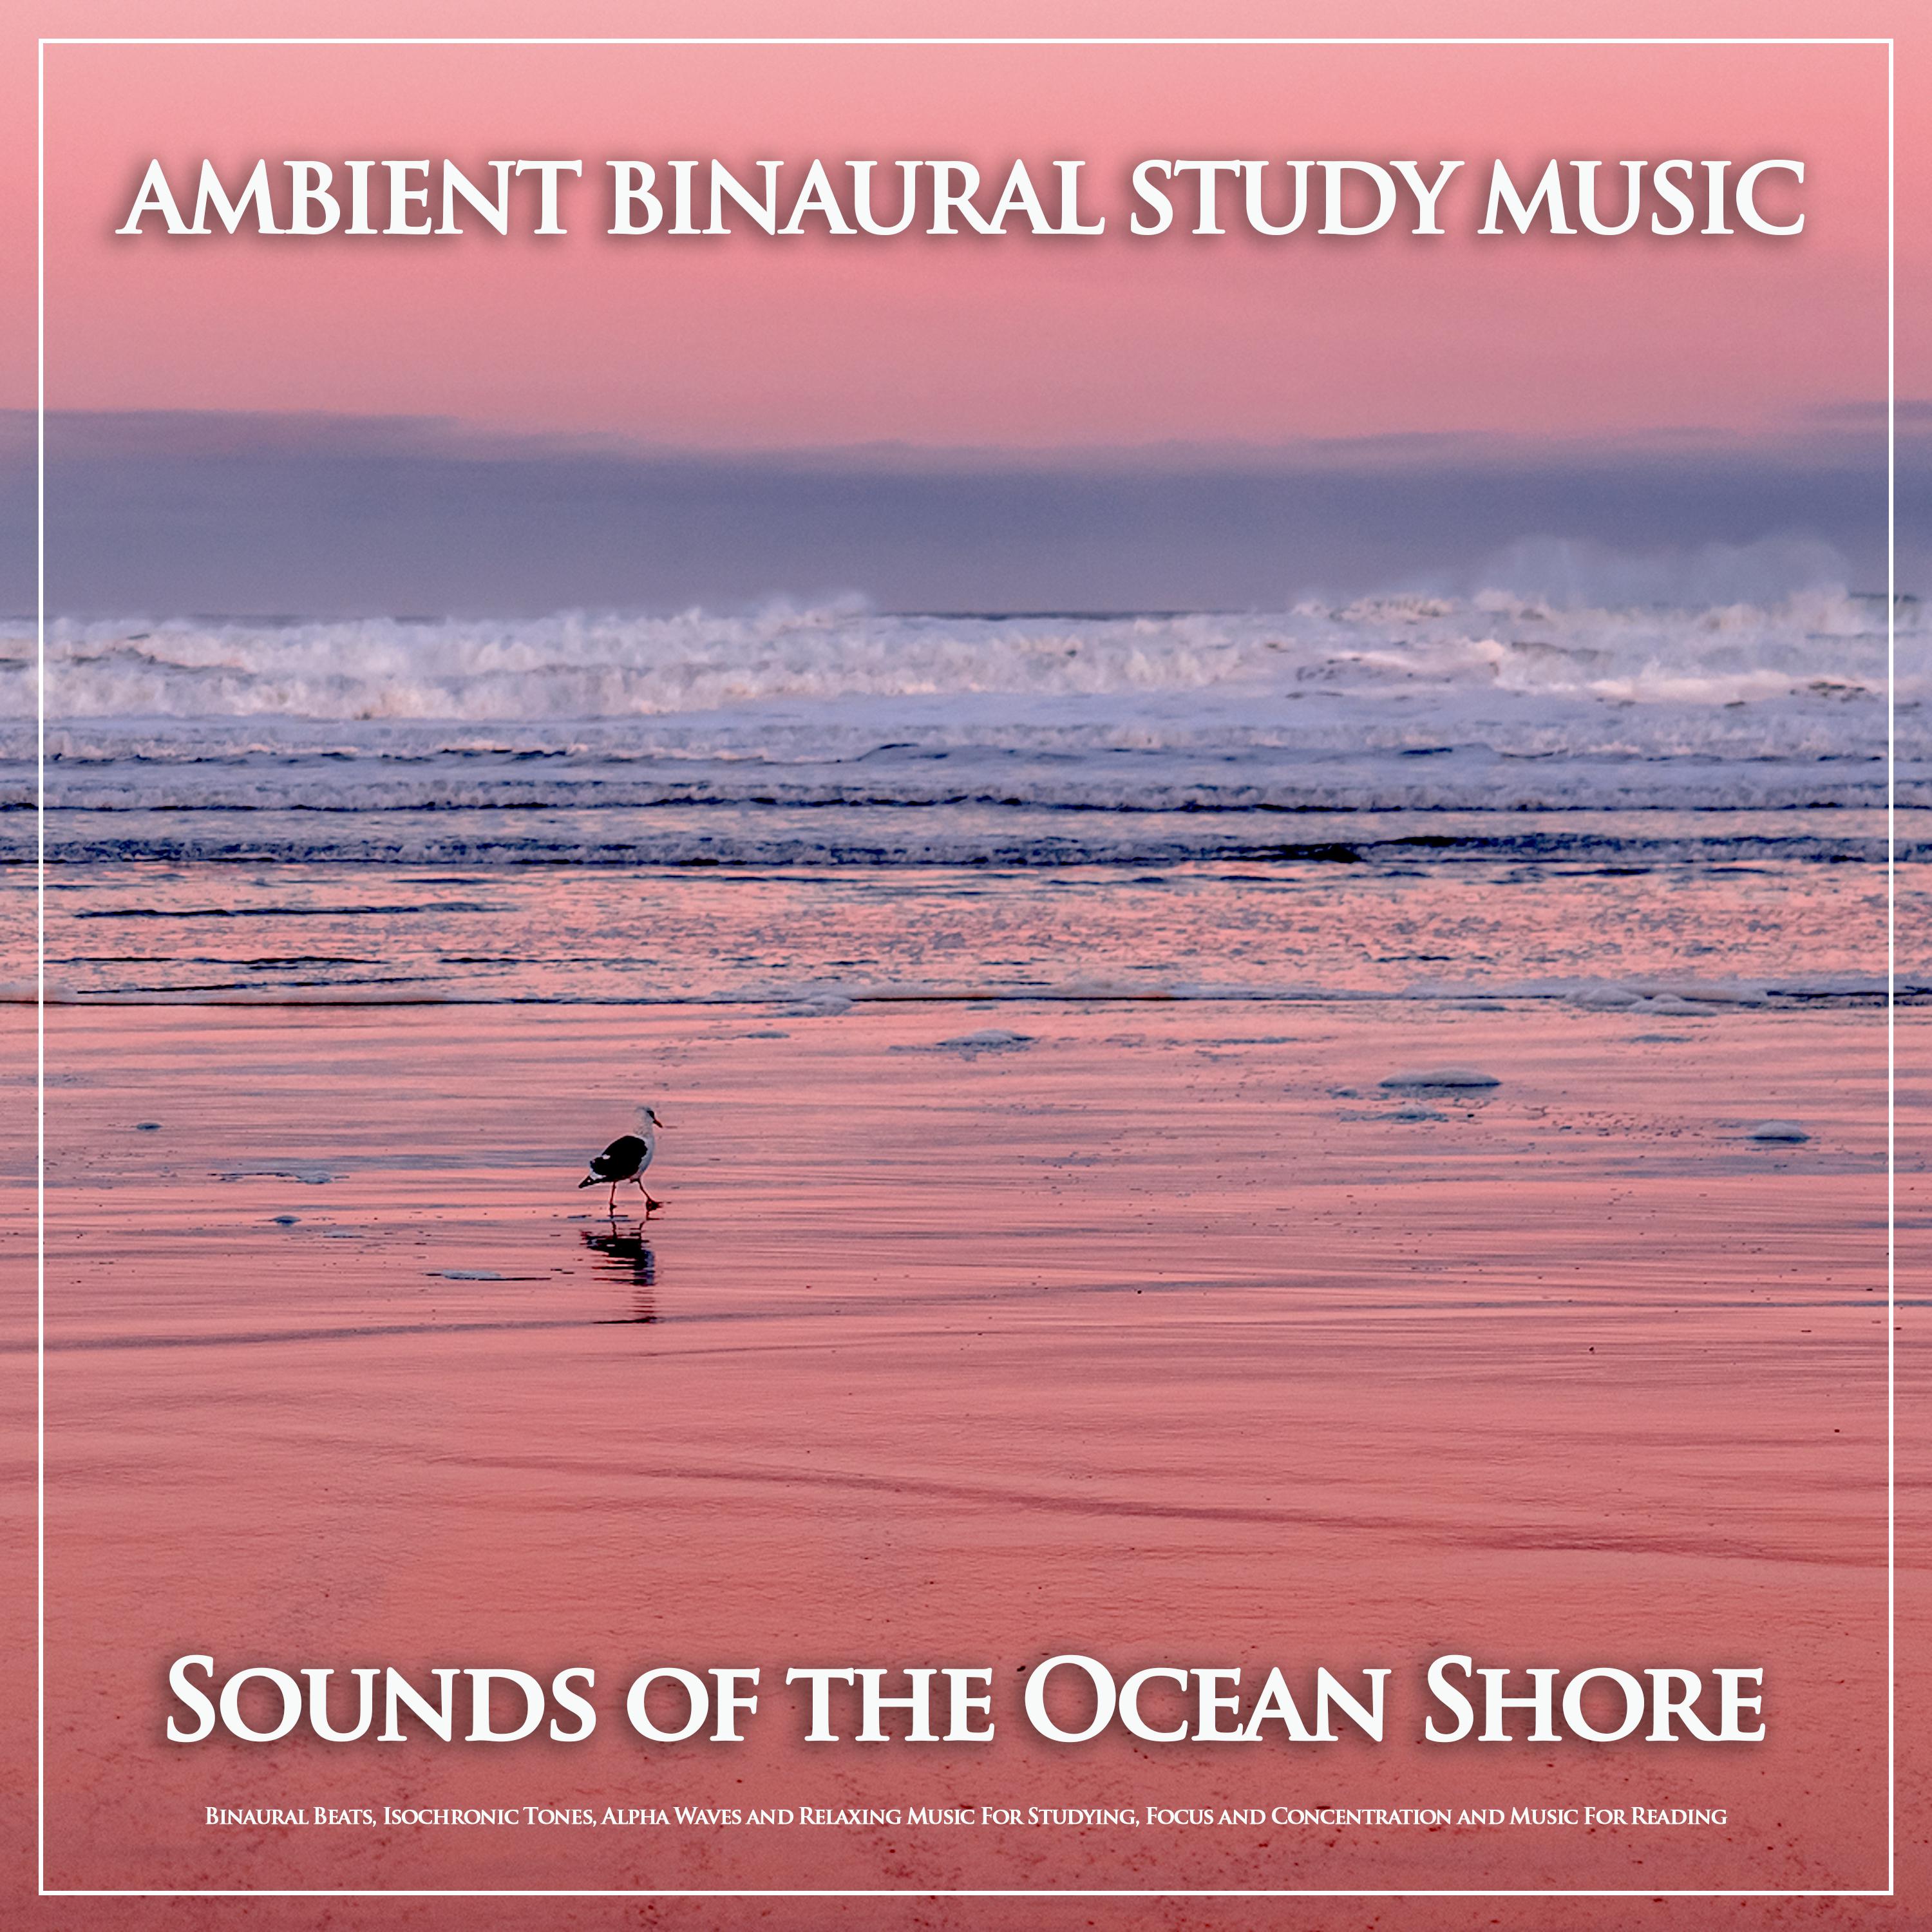 Ambient Binaural Study Music: Sounds of the Ocean Shore, Binaural Beats, Isochronic Tones, Alpha Waves and Relaxing Music For Studying, Focus and Concentration and Music For Reading